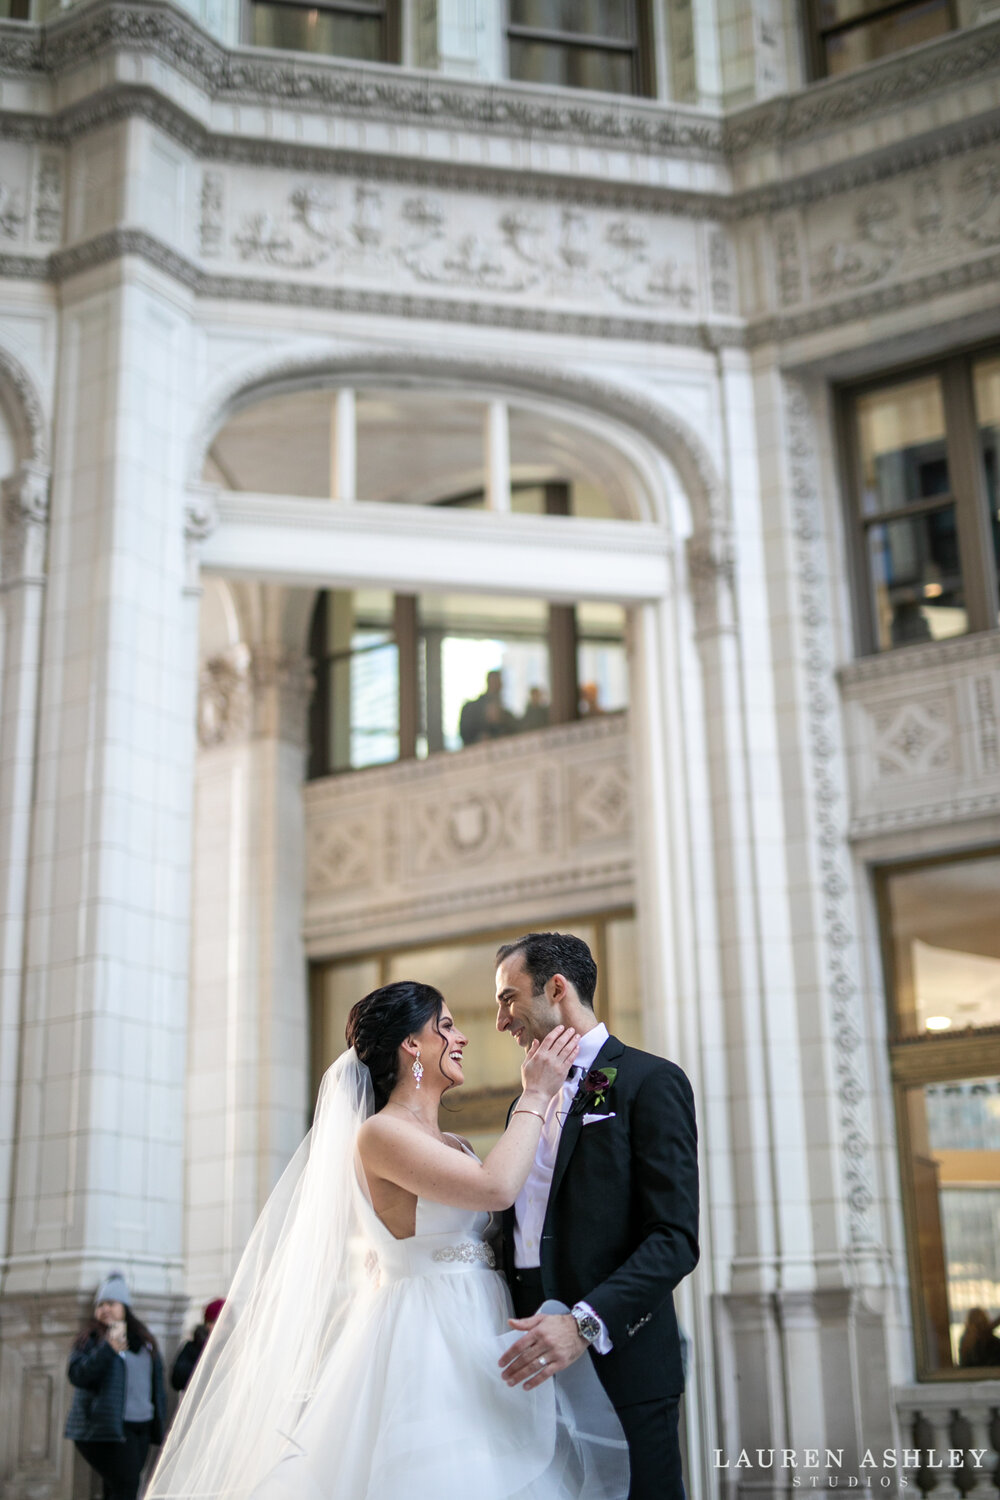 intercontinental-chicago-high-end-michigan-ave-magnificent-mile-wedding-chicago-wedding-photography-62.jpg